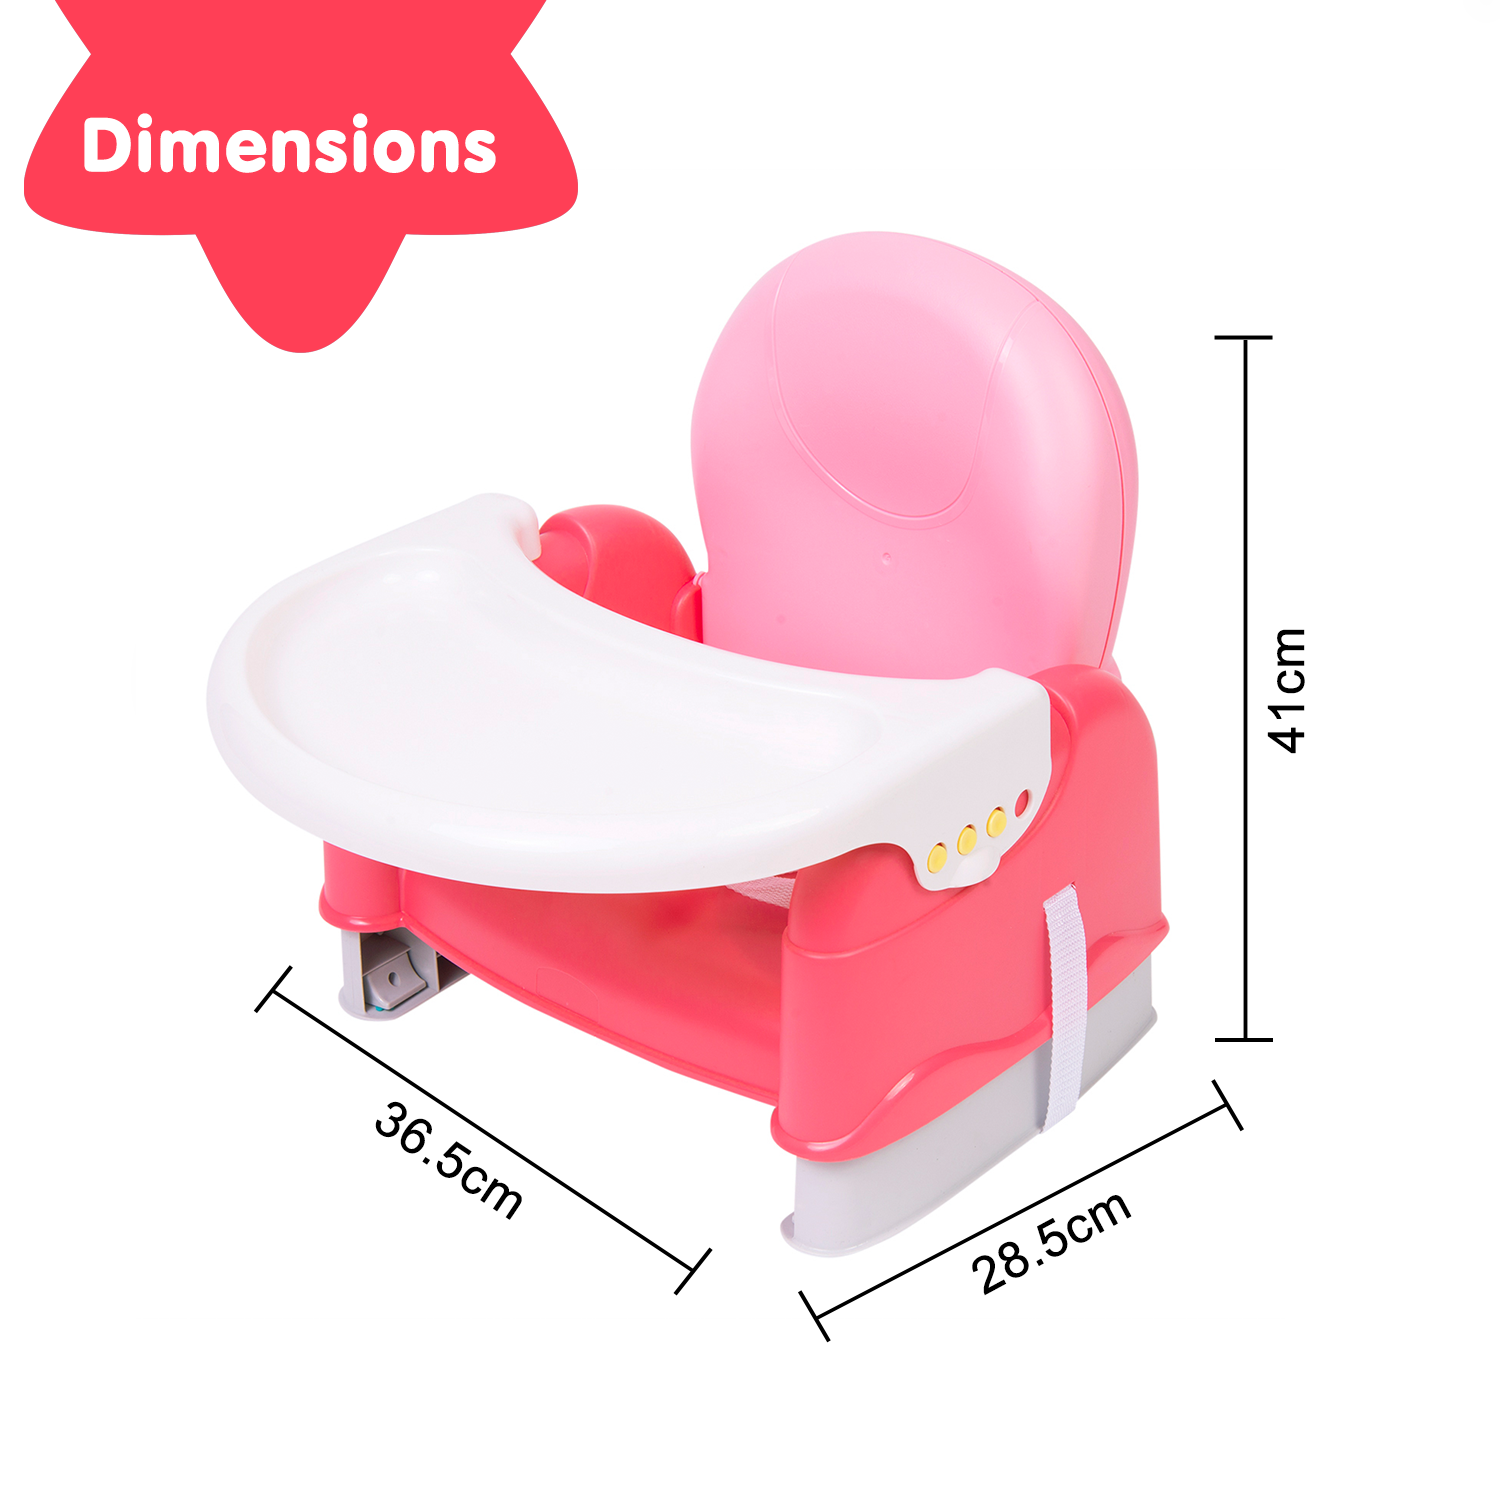 Foldable Feeding Booster Seat Adjustable Height And Food Tray Pink